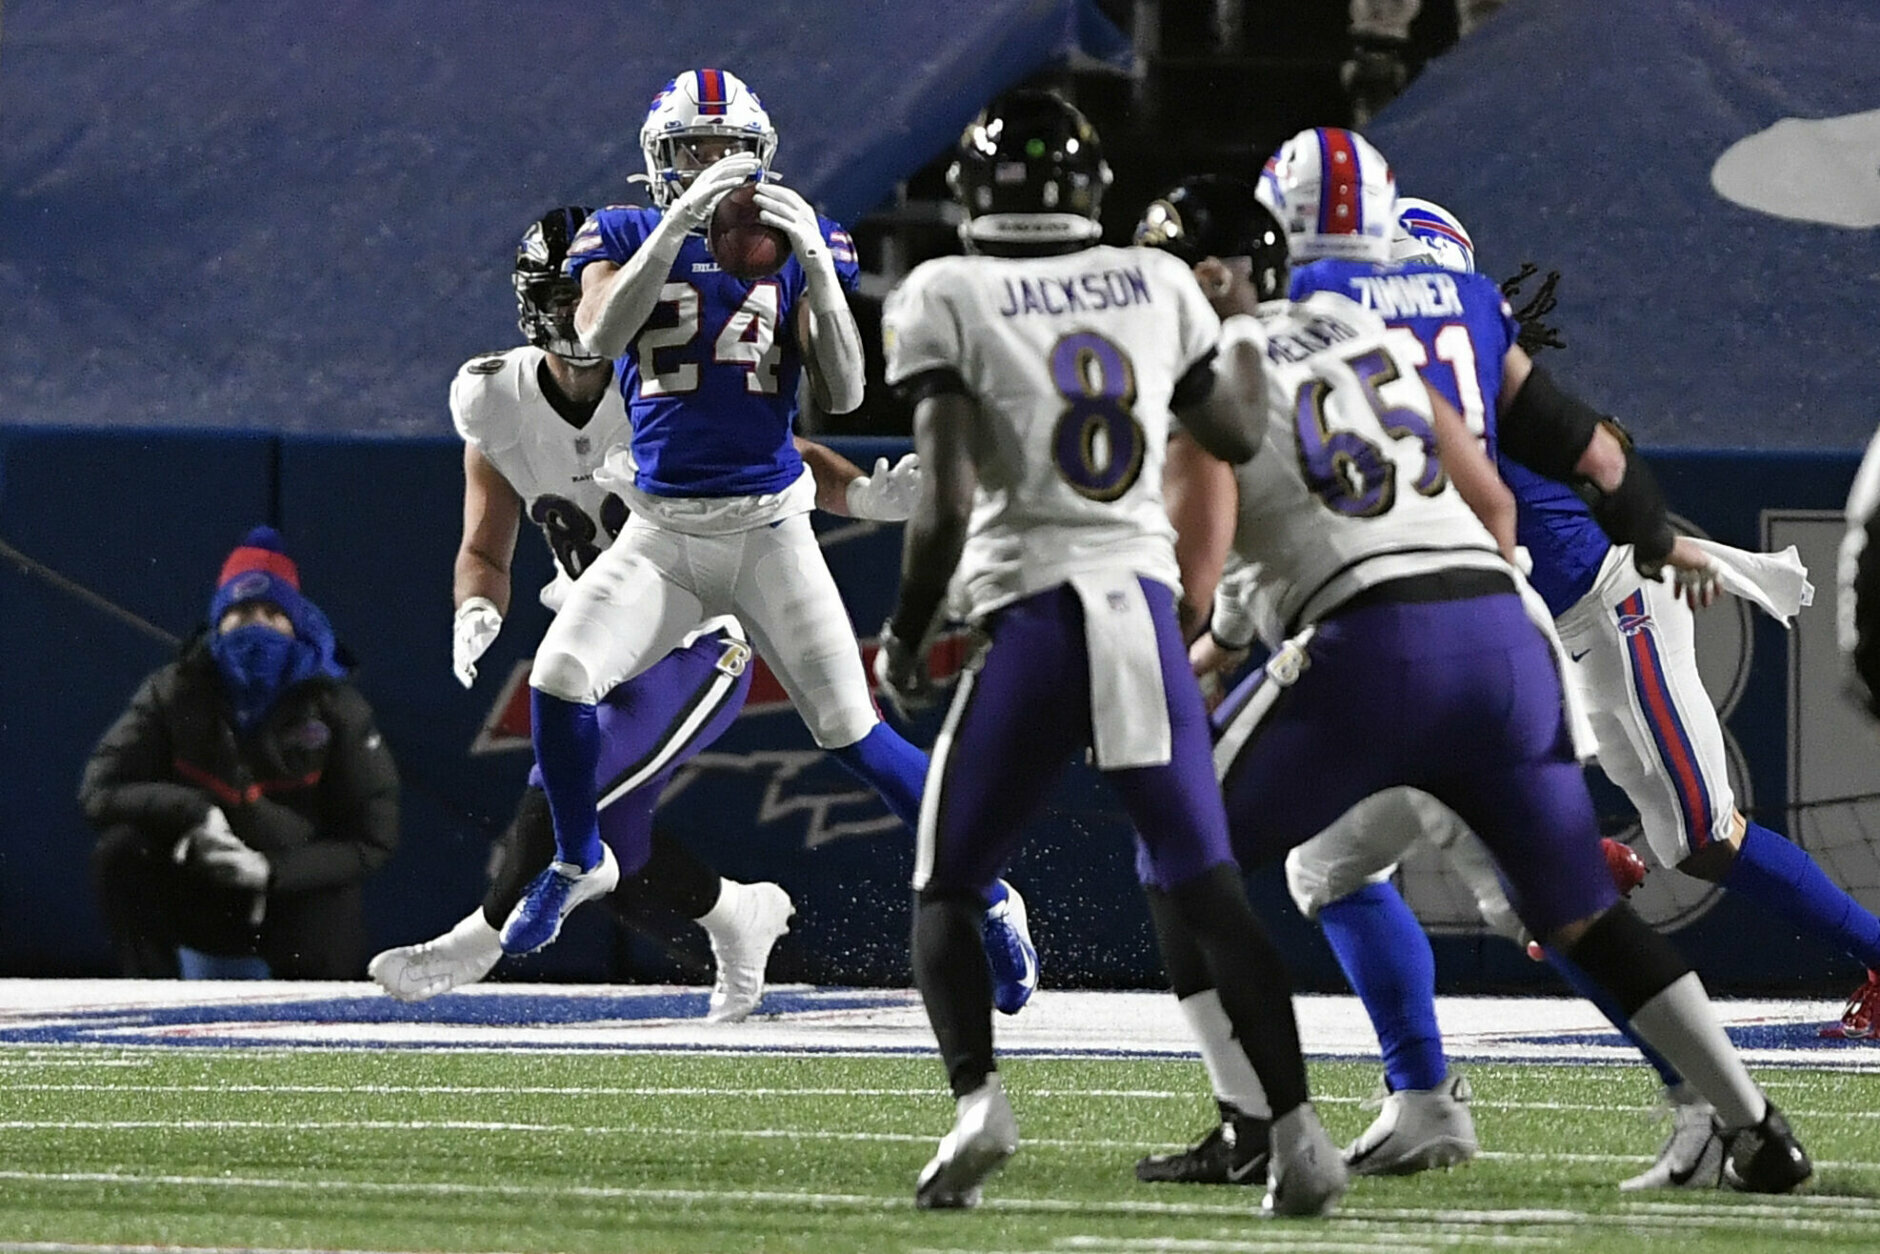 <p><b><i>Ravens 3</i></b><br />
<b><i>Bills 17</i></b></p>
<p>Everything Baltimore does well betrayed them in Buffalo: <a href="https://twitter.com/ESPNStatsInfo/status/1350630005370449922?s=20" target="_blank" rel="noopener" data-saferedirecturl="https://www.google.com/url?q=https://twitter.com/ESPNStatsInfo/status/1350630005370449922?s%3D20&amp;source=gmail&amp;ust=1611004960069000&amp;usg=AFQjCNF2JEq73w03EqMG2MR_7RXds9oL-g">Justin Tucker missed multiple kicks</a>. Lamar Jackson threw his first career red zone interception before leaving with a concussion. The run game — which churned 1,573 rushing yards during the Ravens&#8217; six-game win streak, most in that span since 1949 — looked mortal. I know it&#8217;s not another one-and-done like the previous two seasons, but the way they lost this game will haunt the Ravens ever more.</p>
<p>But fret not, Maryland football fans — Stefon Diggs will represent your interests with style. The former Terp was half of Josh Allen’s passing productivity, notching his second straight playoff game with 100 receiving yards and a touchdown — Buffalo&#8217;s first to do each since heyday heroes James Lofton and Thurman Thomas, respectively. It feels like the Bills&#8217; heyday is back and it couldn&#8217;t happen to <a href="https://www.espn.com/nfl/story/_/id/30729869/buffalo-bills-fans-donate-lamar-jackson-backed-charity-victory-baltimore-ravens" target="_blank" rel="noopener">a classier fan base</a>.</p>
